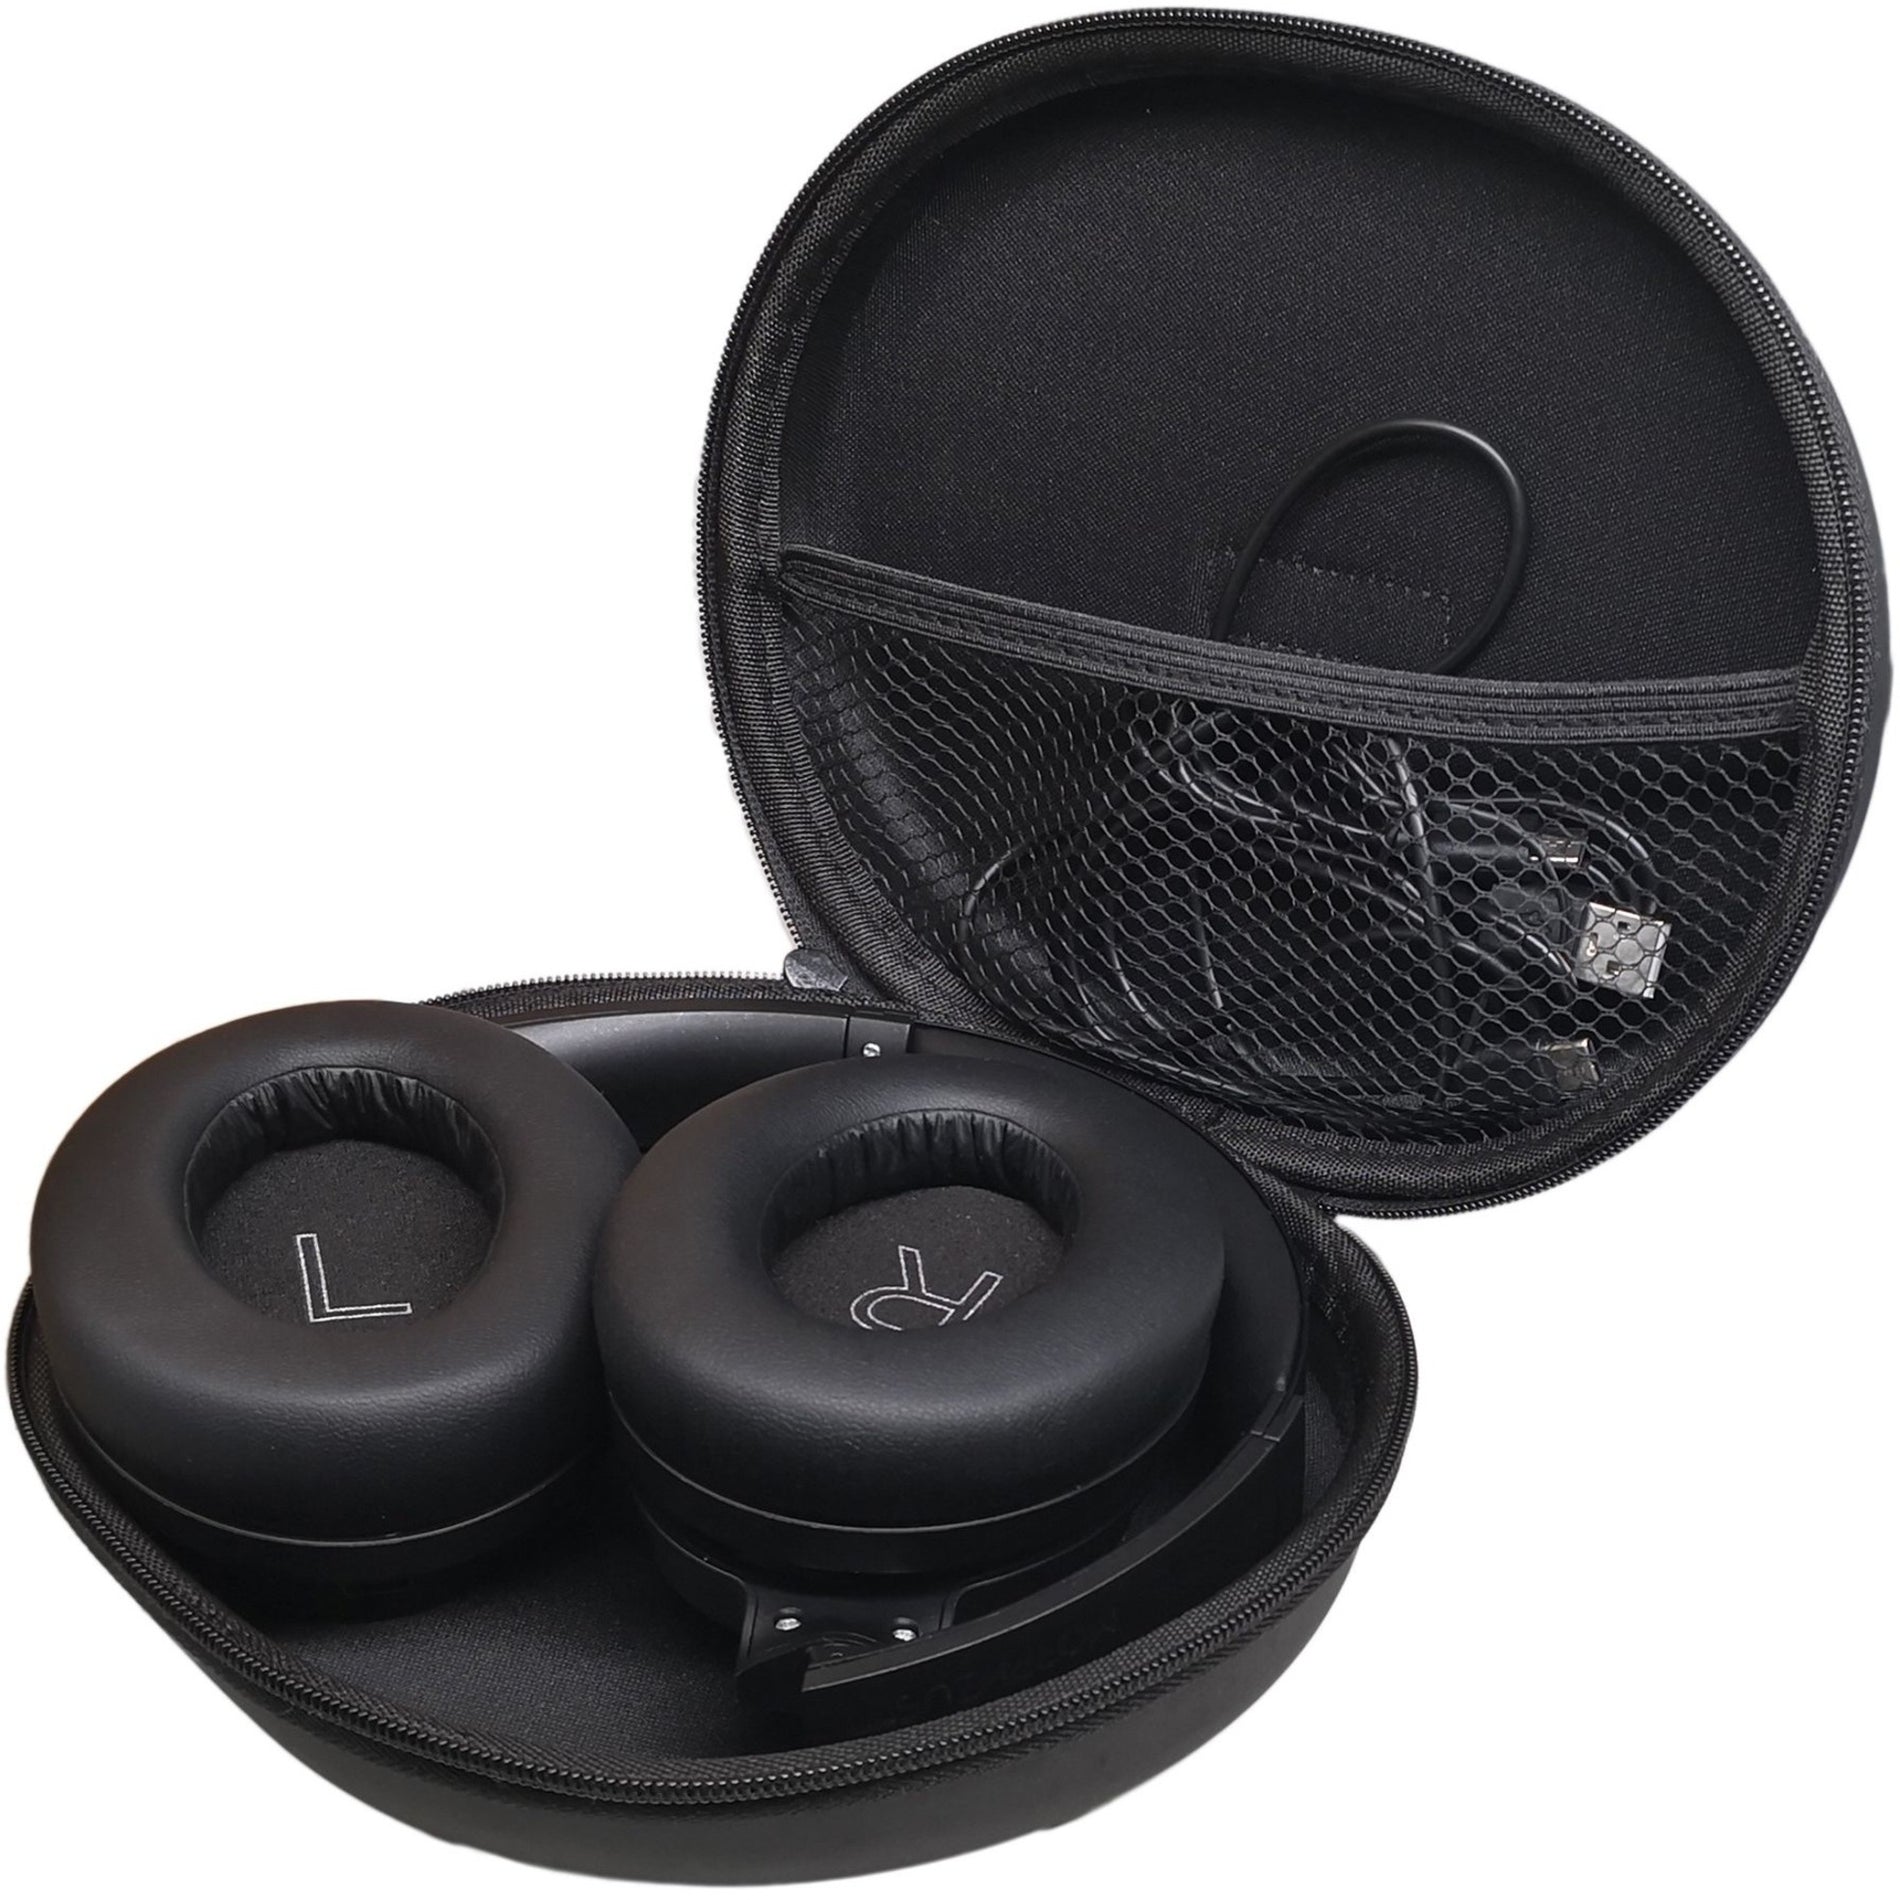 Morpheus 360 HP7850HD KRAVE HD Stereo Wireless Headphone, Noise Cancelling, CVC 8 Mic, Case Included